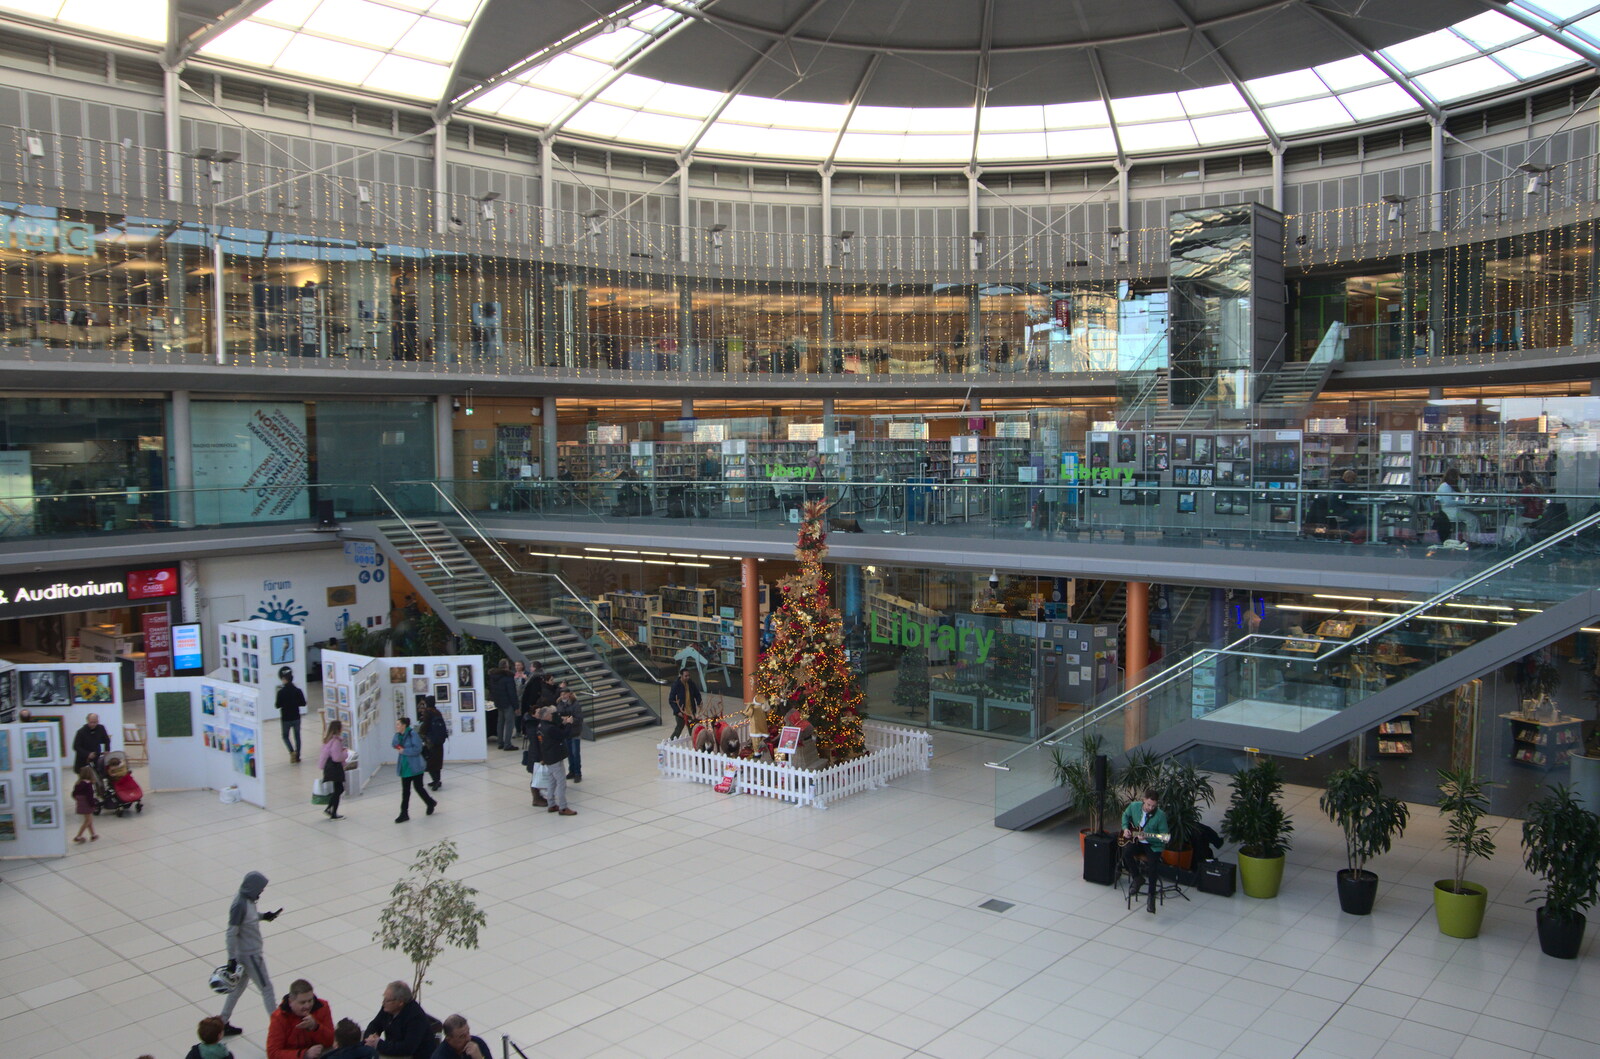 Inside the Forum from Christmas Shopping in Norwich, Norfolk - 21st December 2022